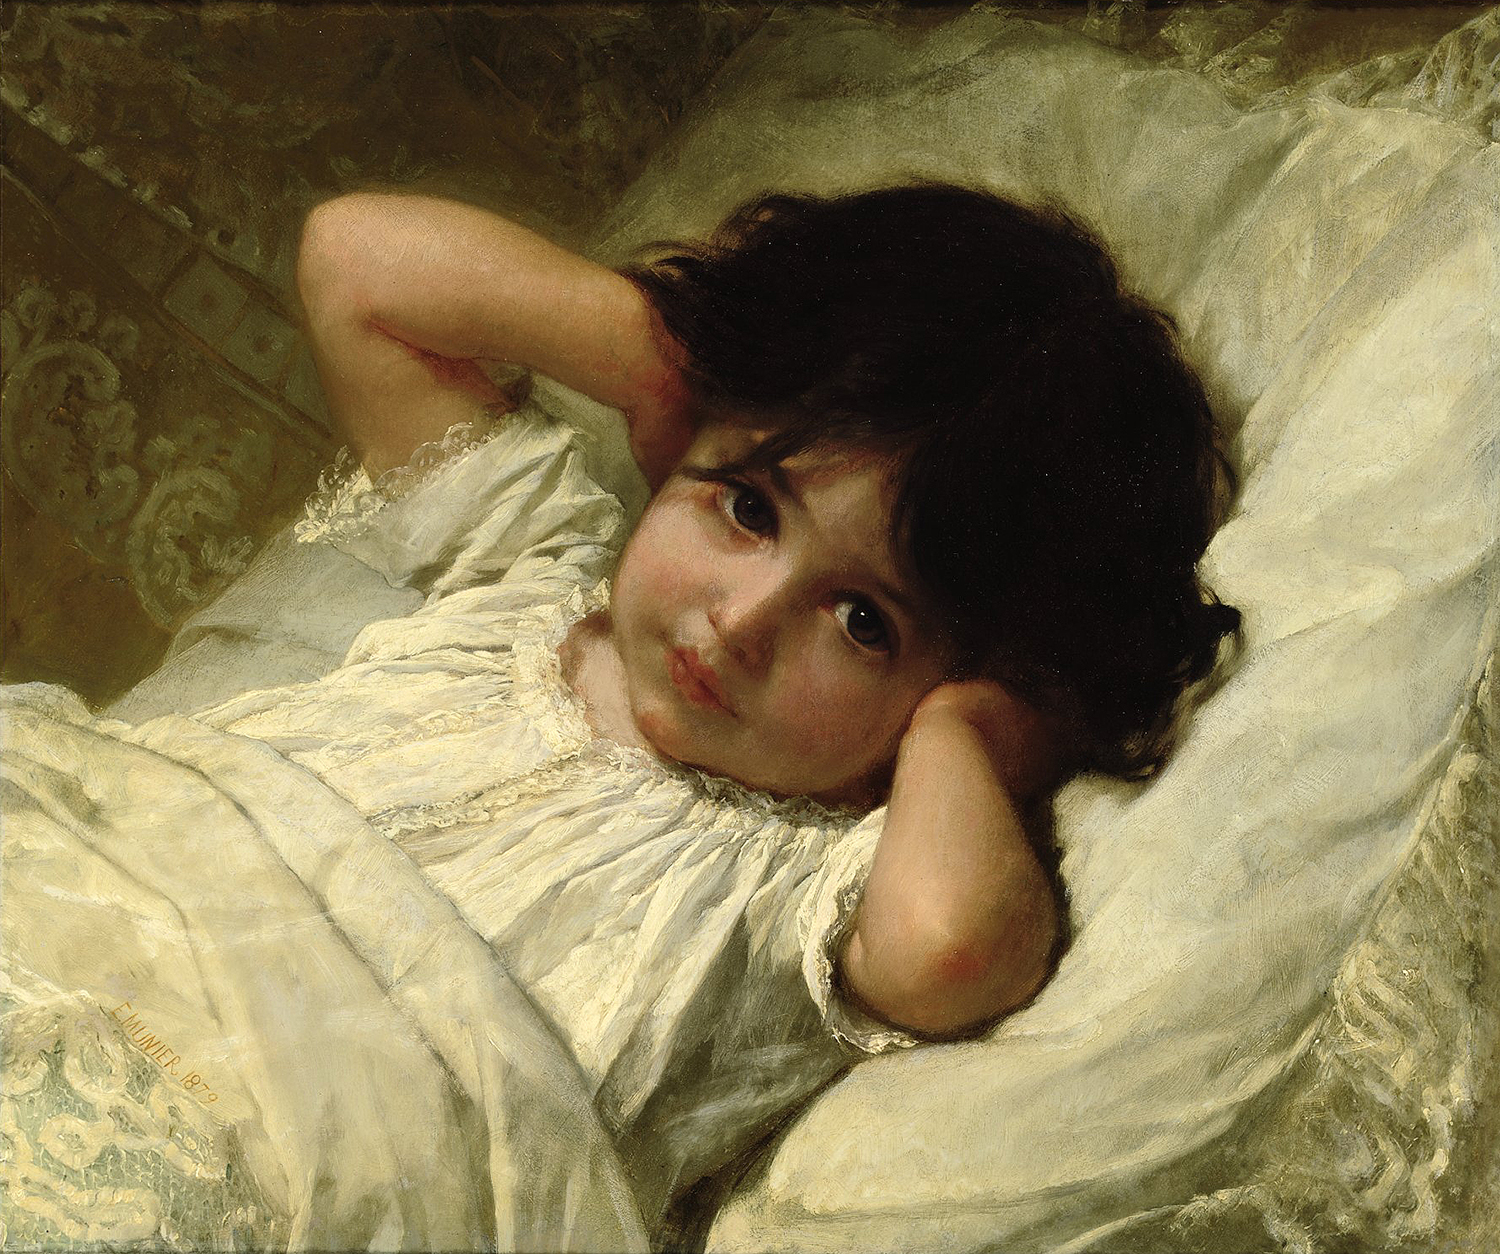 a young girl with dark hair in bed